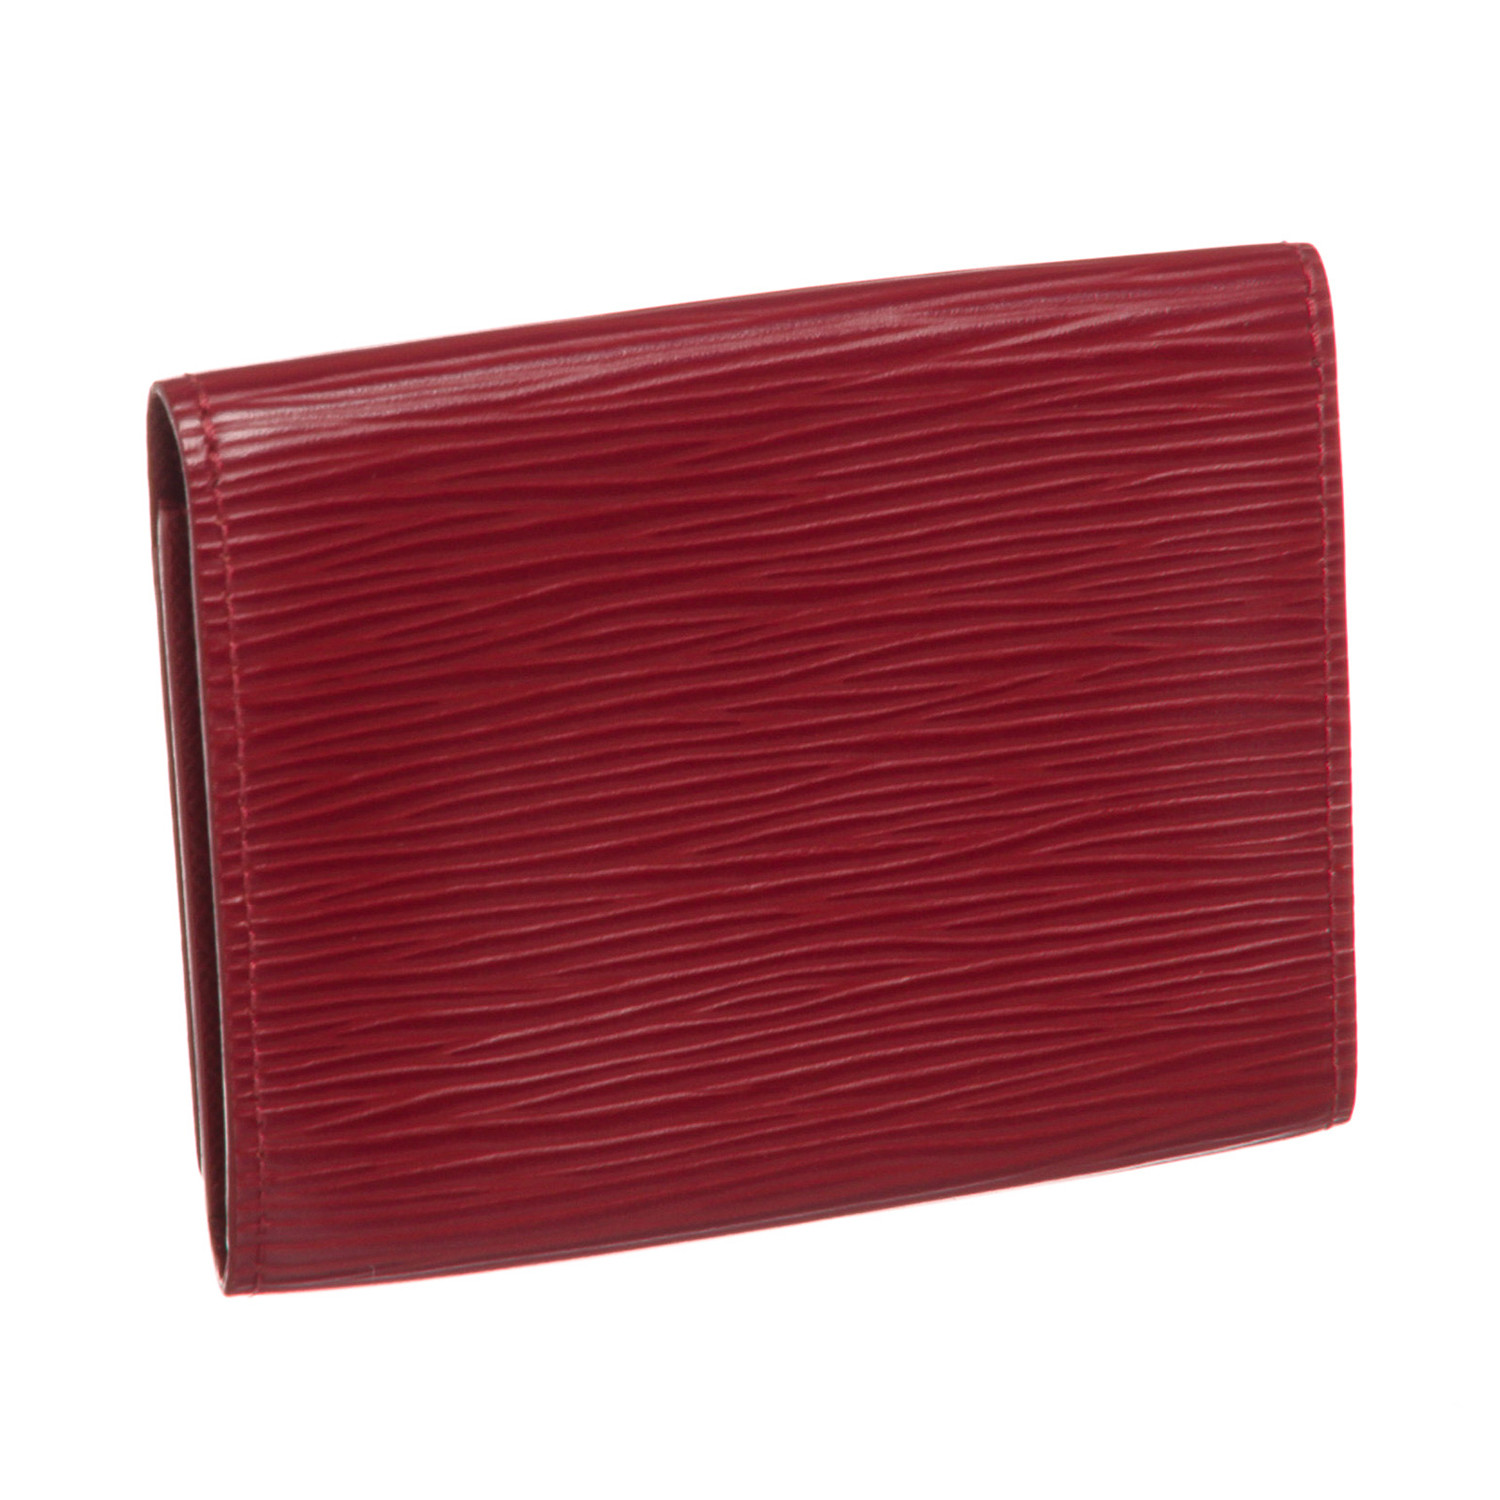 Louis Vuitton // 2009 Red Epi Leather Business Cardholder Wallet // CA2039 // Pre-Owned ...